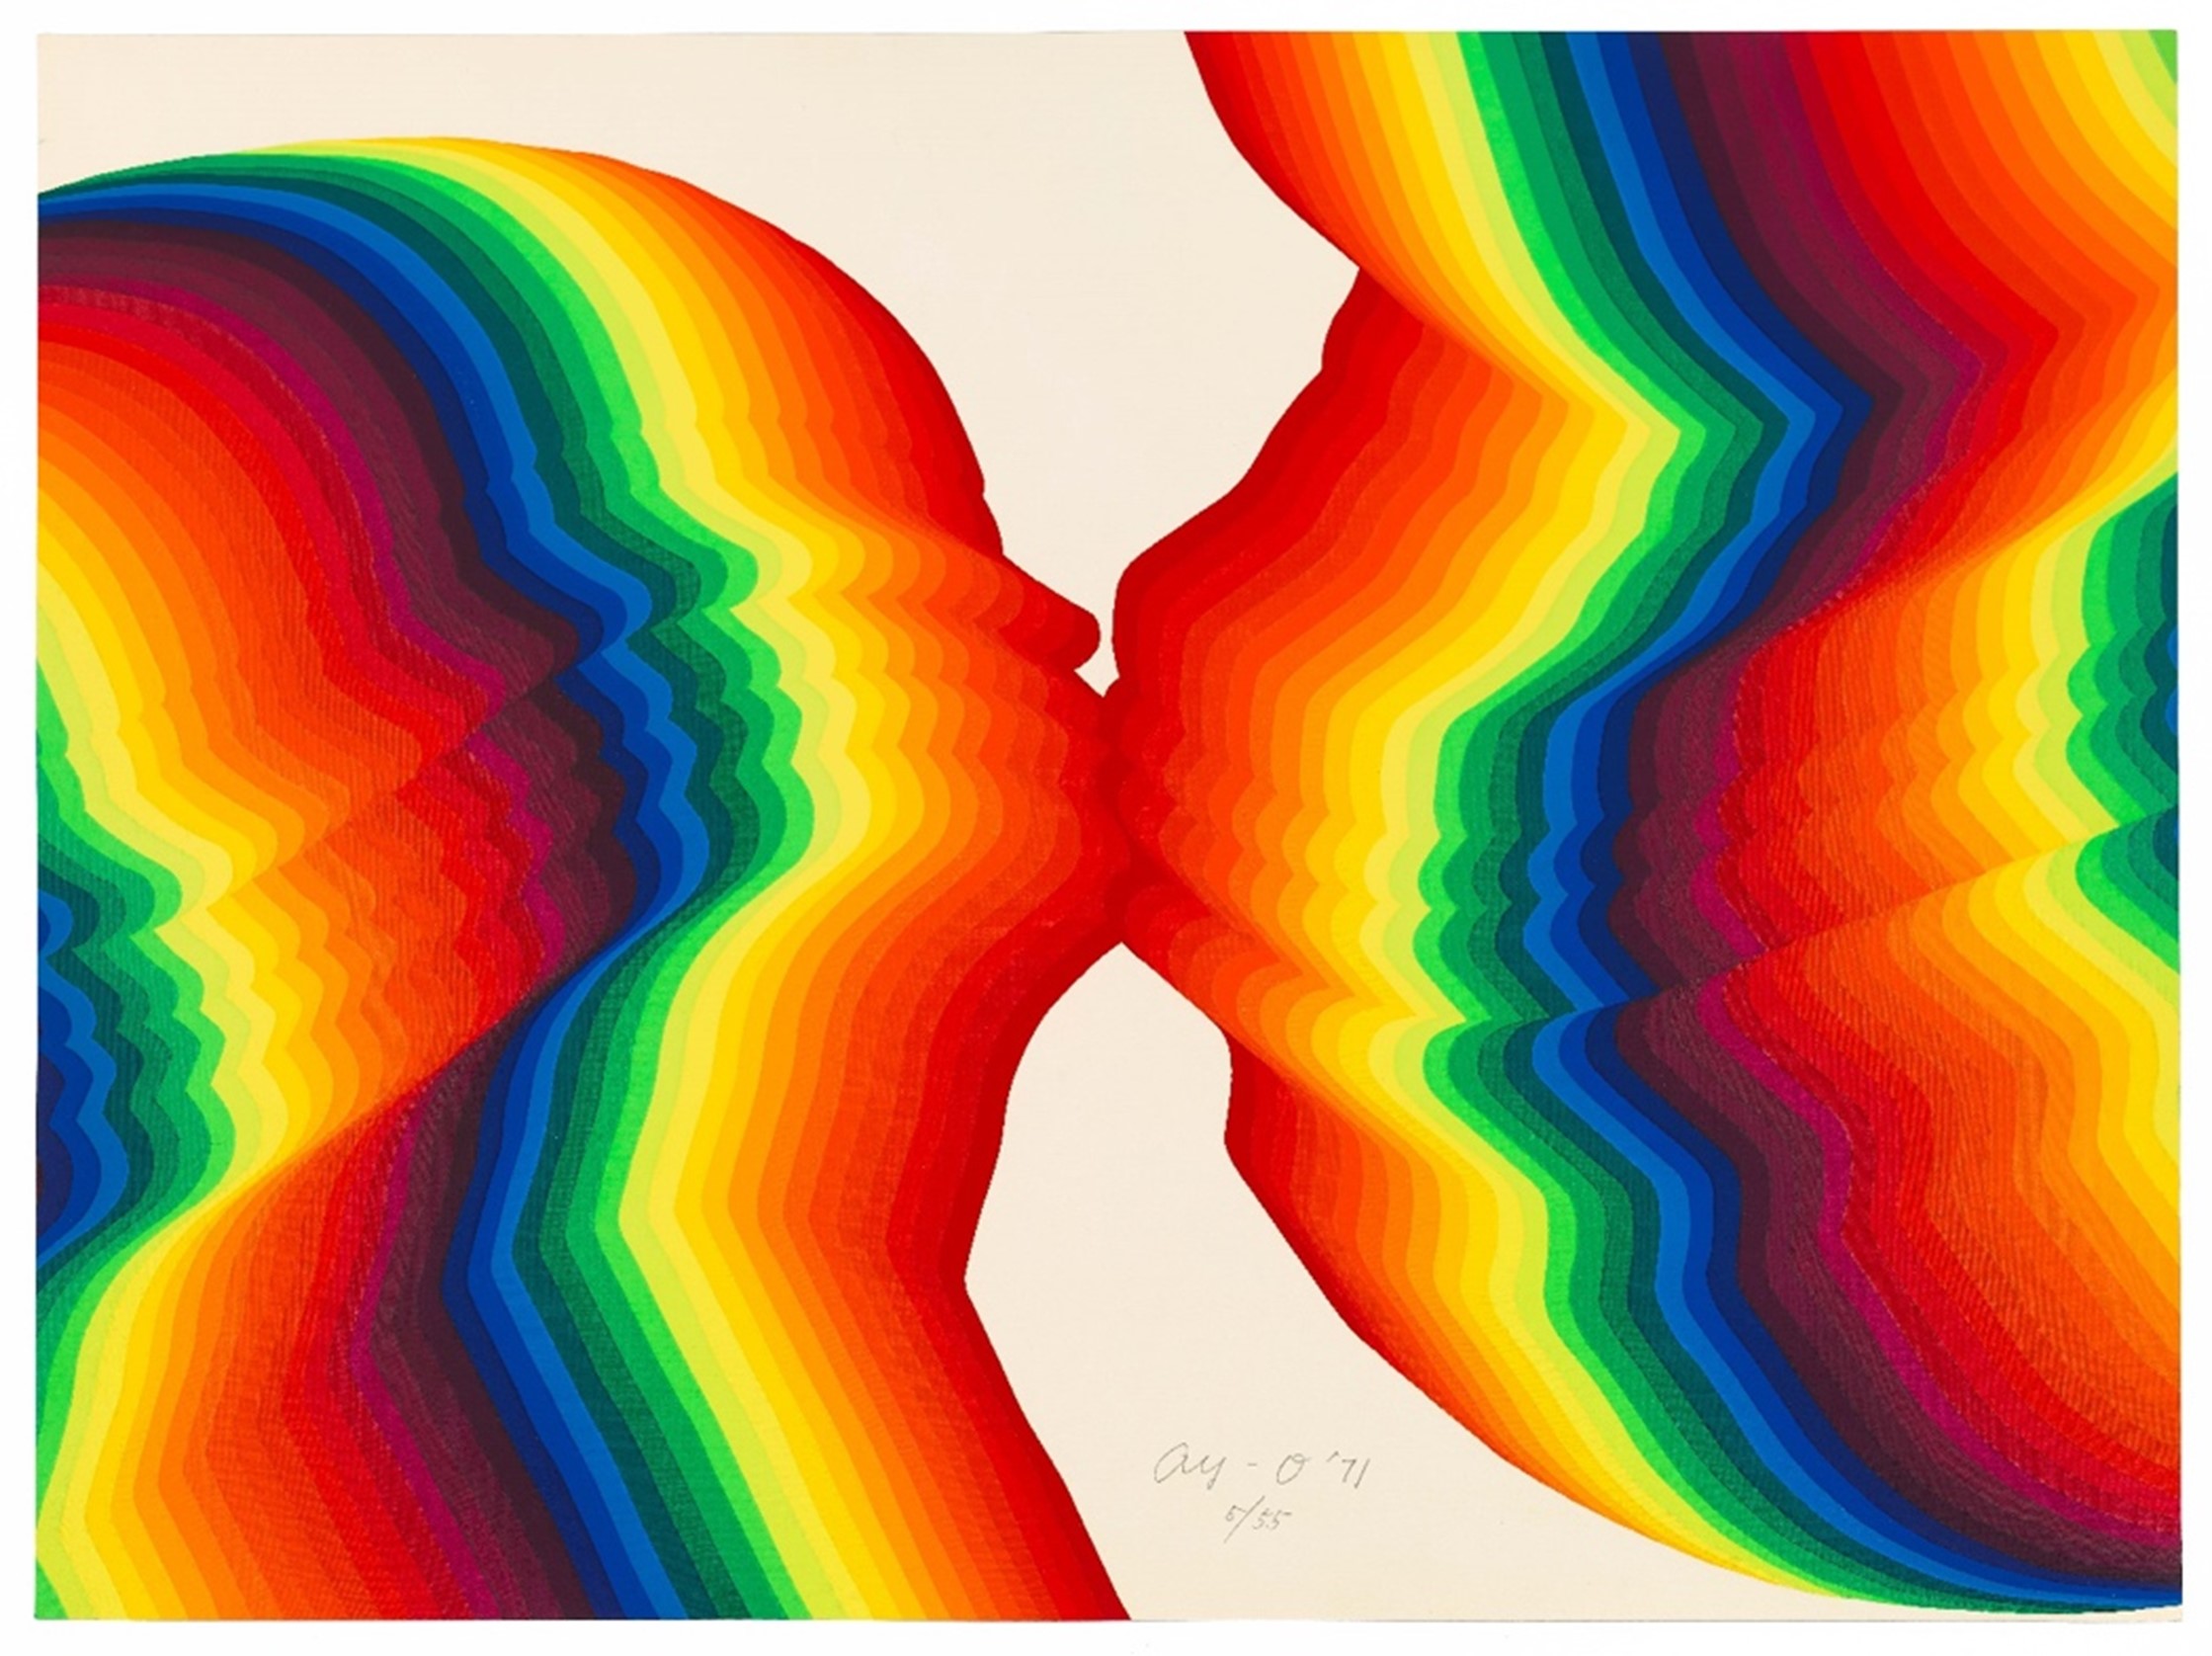 Highly stylized illustration of the outlines of two people depicted in rainbow colors